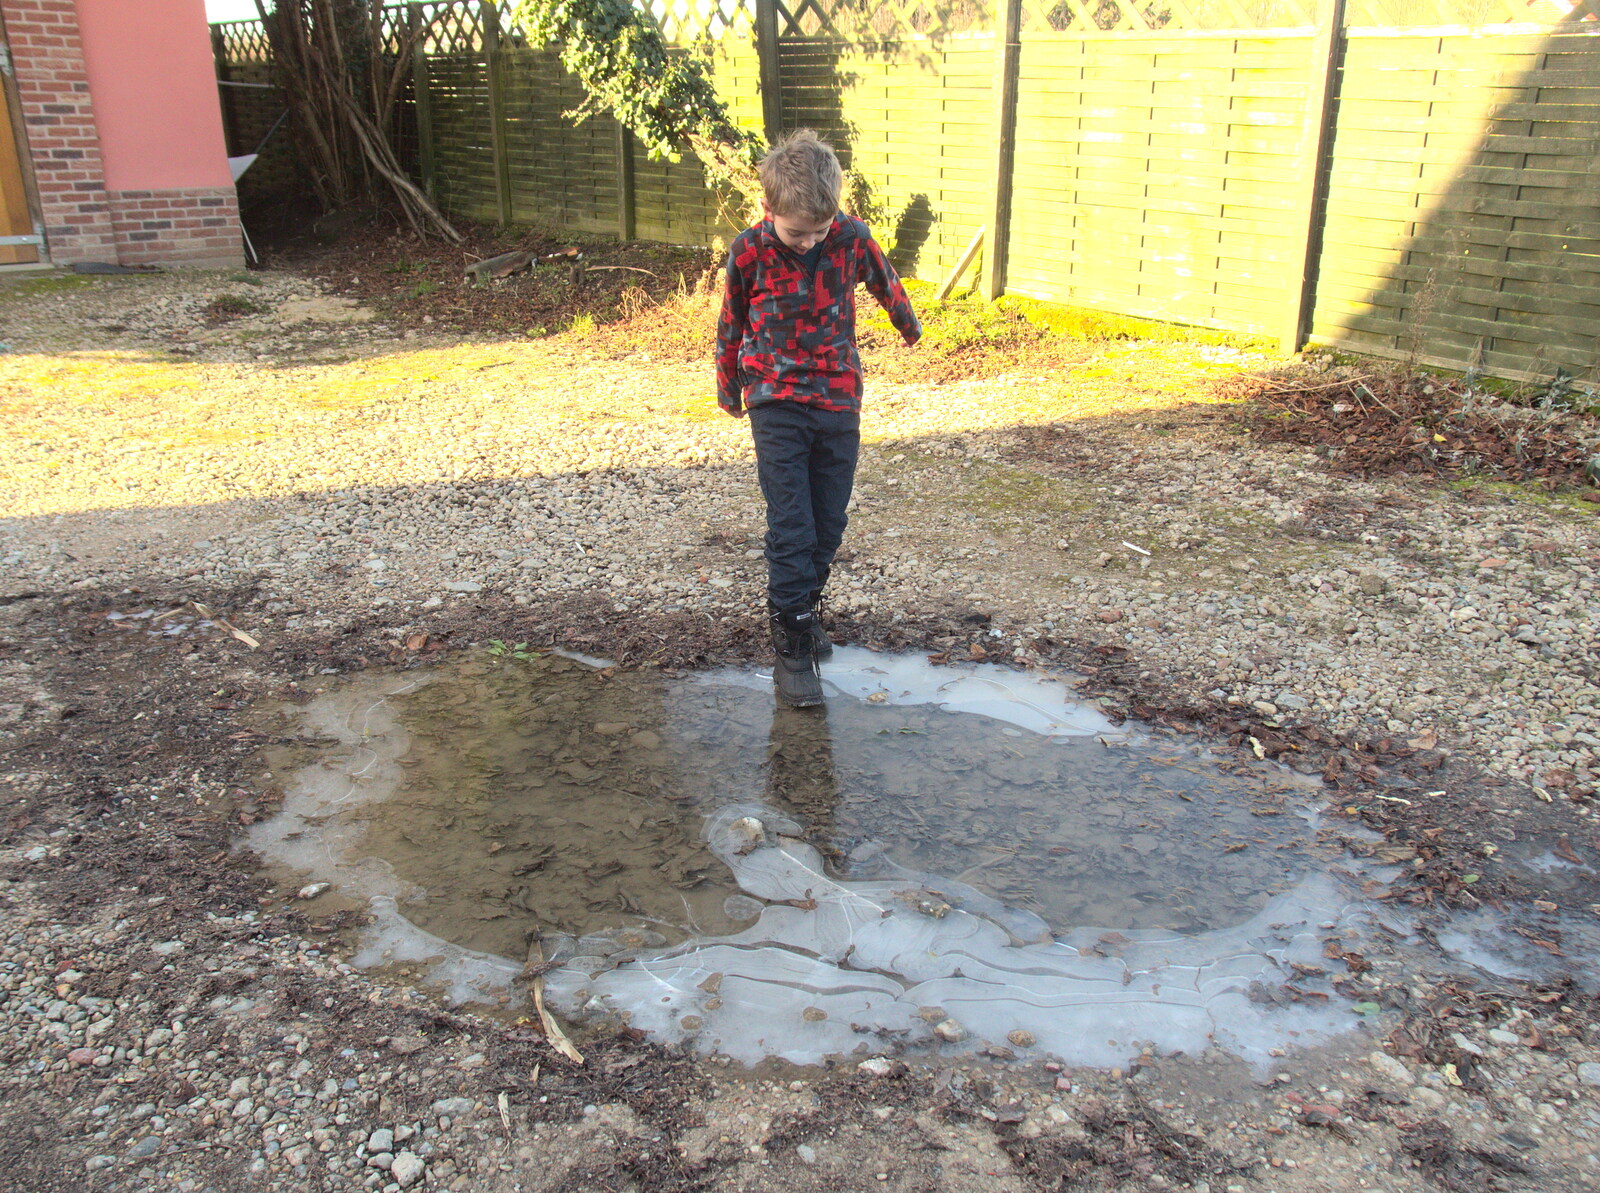 Fred breaks up more frozen puddles from A Snowy January Miscellany, Eye, Suffolk - 15th January 2017